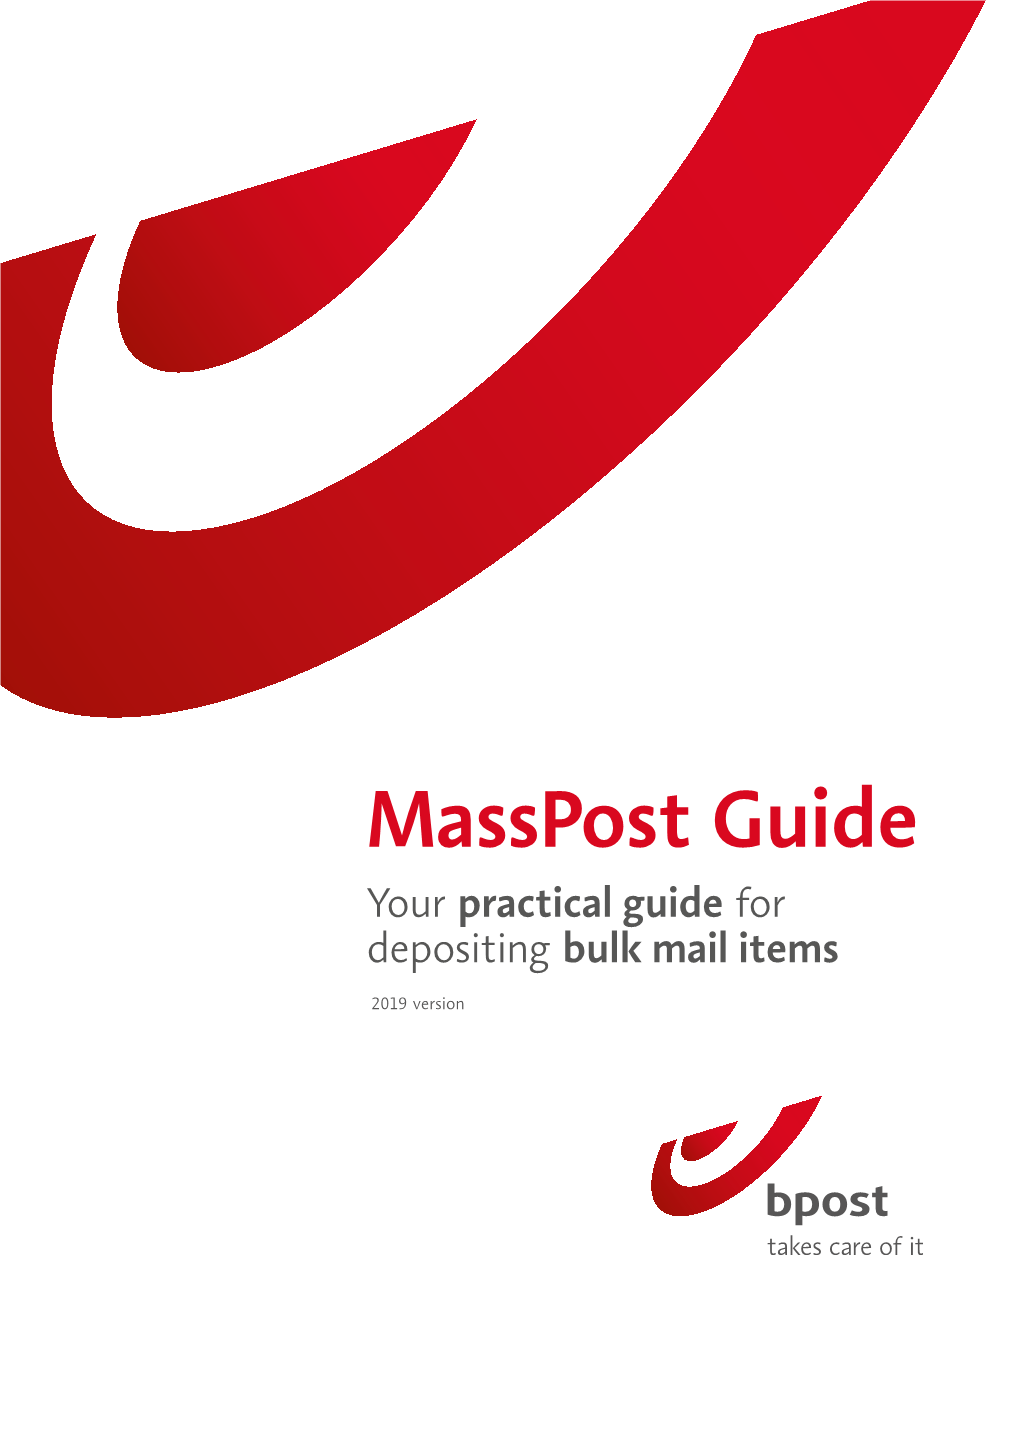 Masspost Guide Your Practical Guide for Depositing Bulk Mail Items